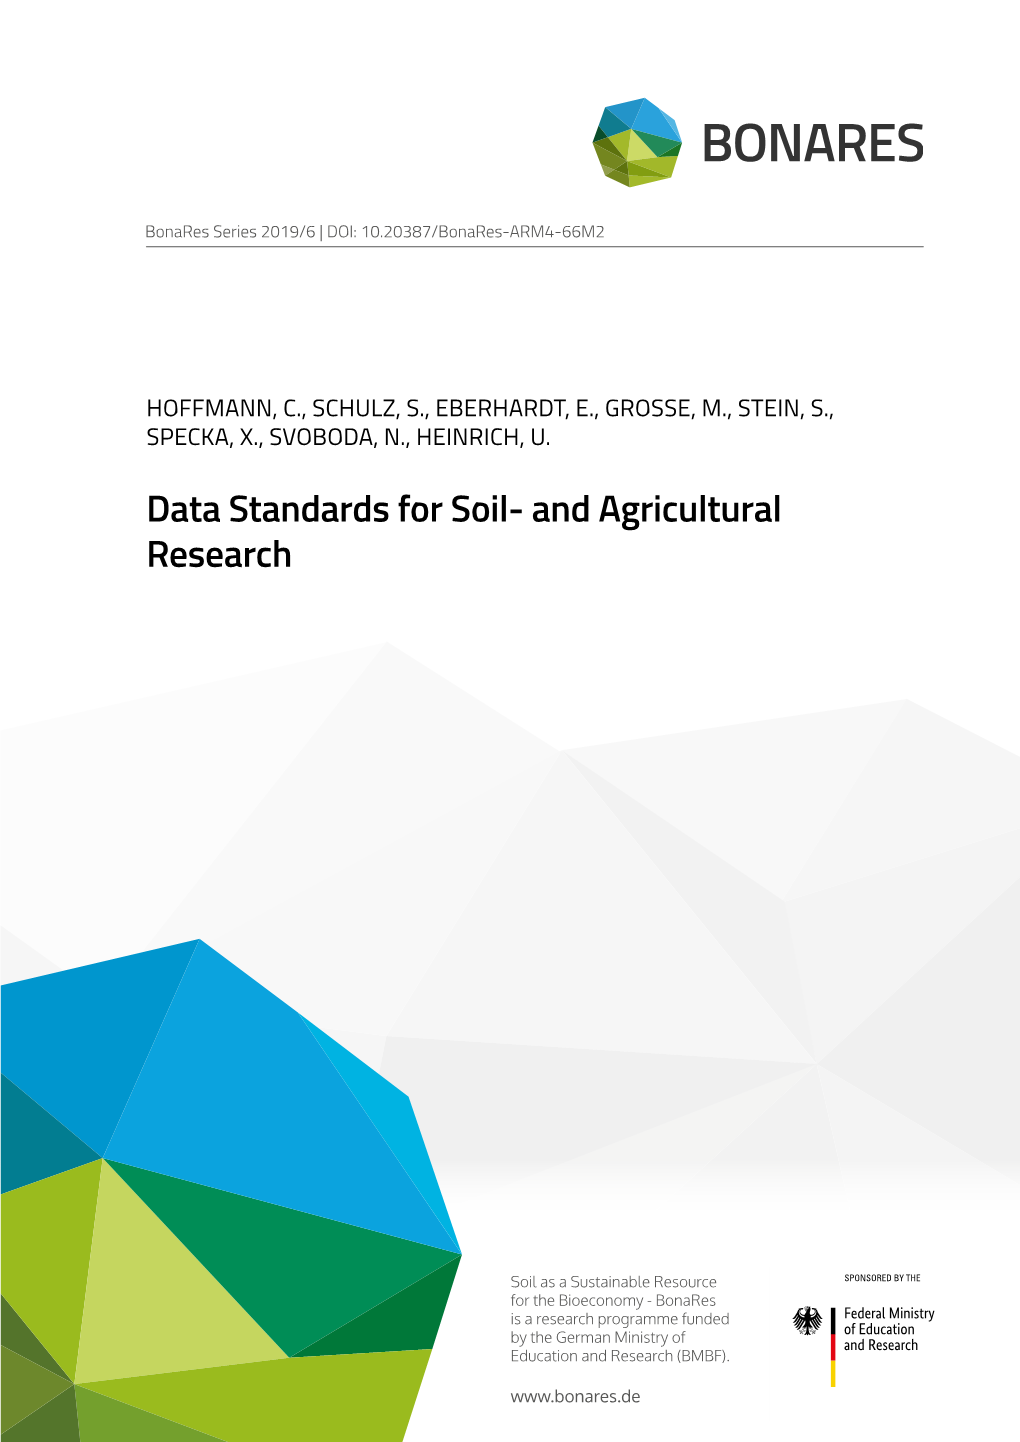 Data Standards for Soil- and Agricultural Research